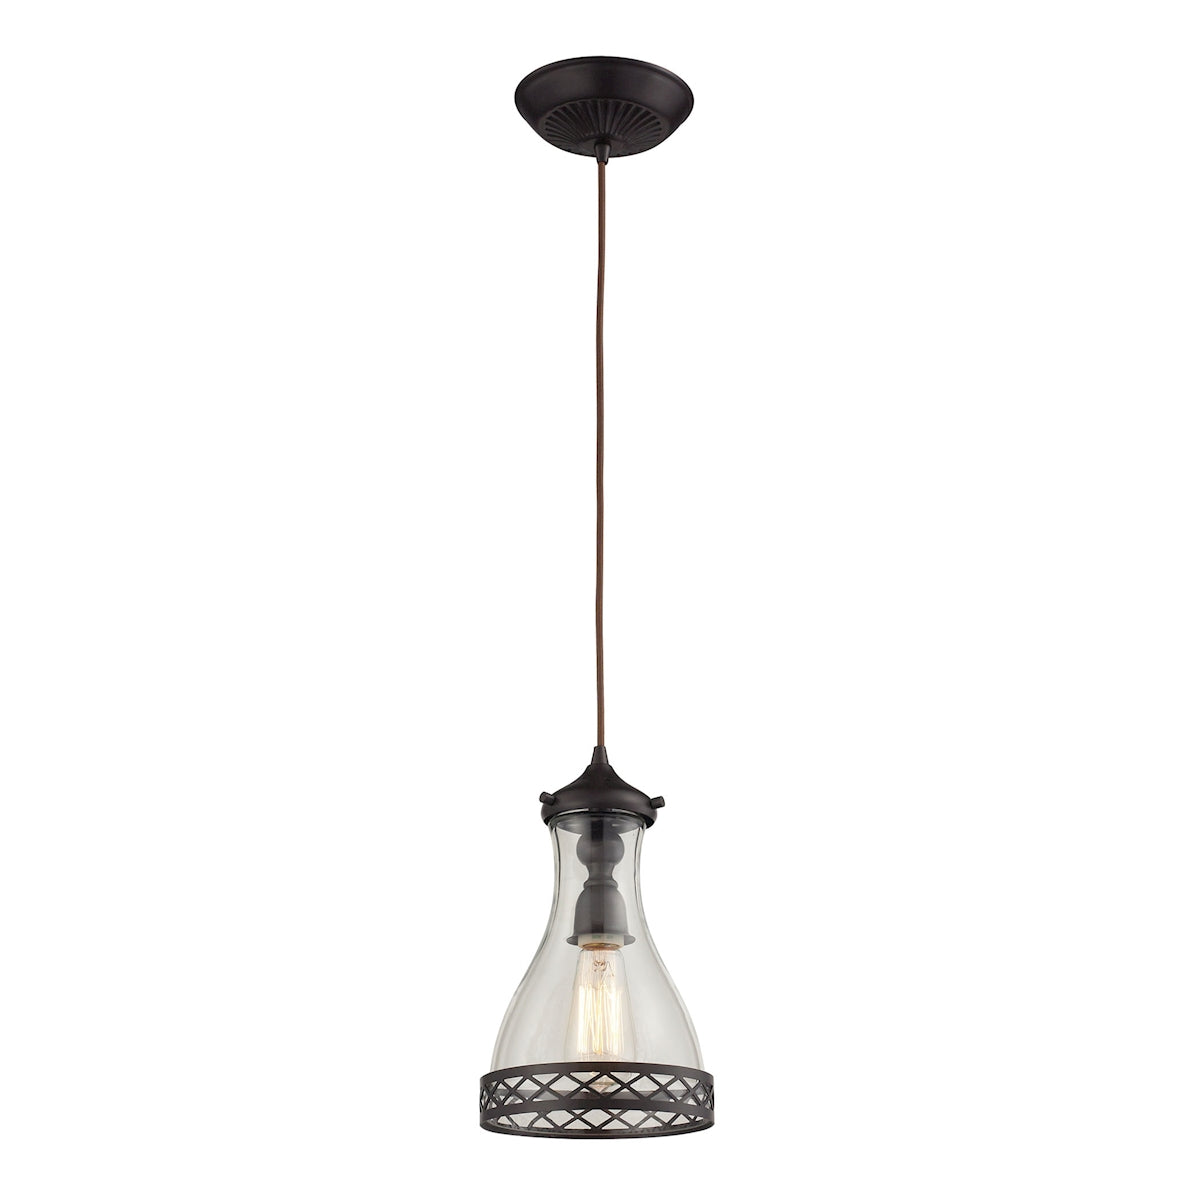 ELK Lighting 63034-1 Brookline 1-Light Mini Pendant in Oiled Bronze with Metal and Glass Shade